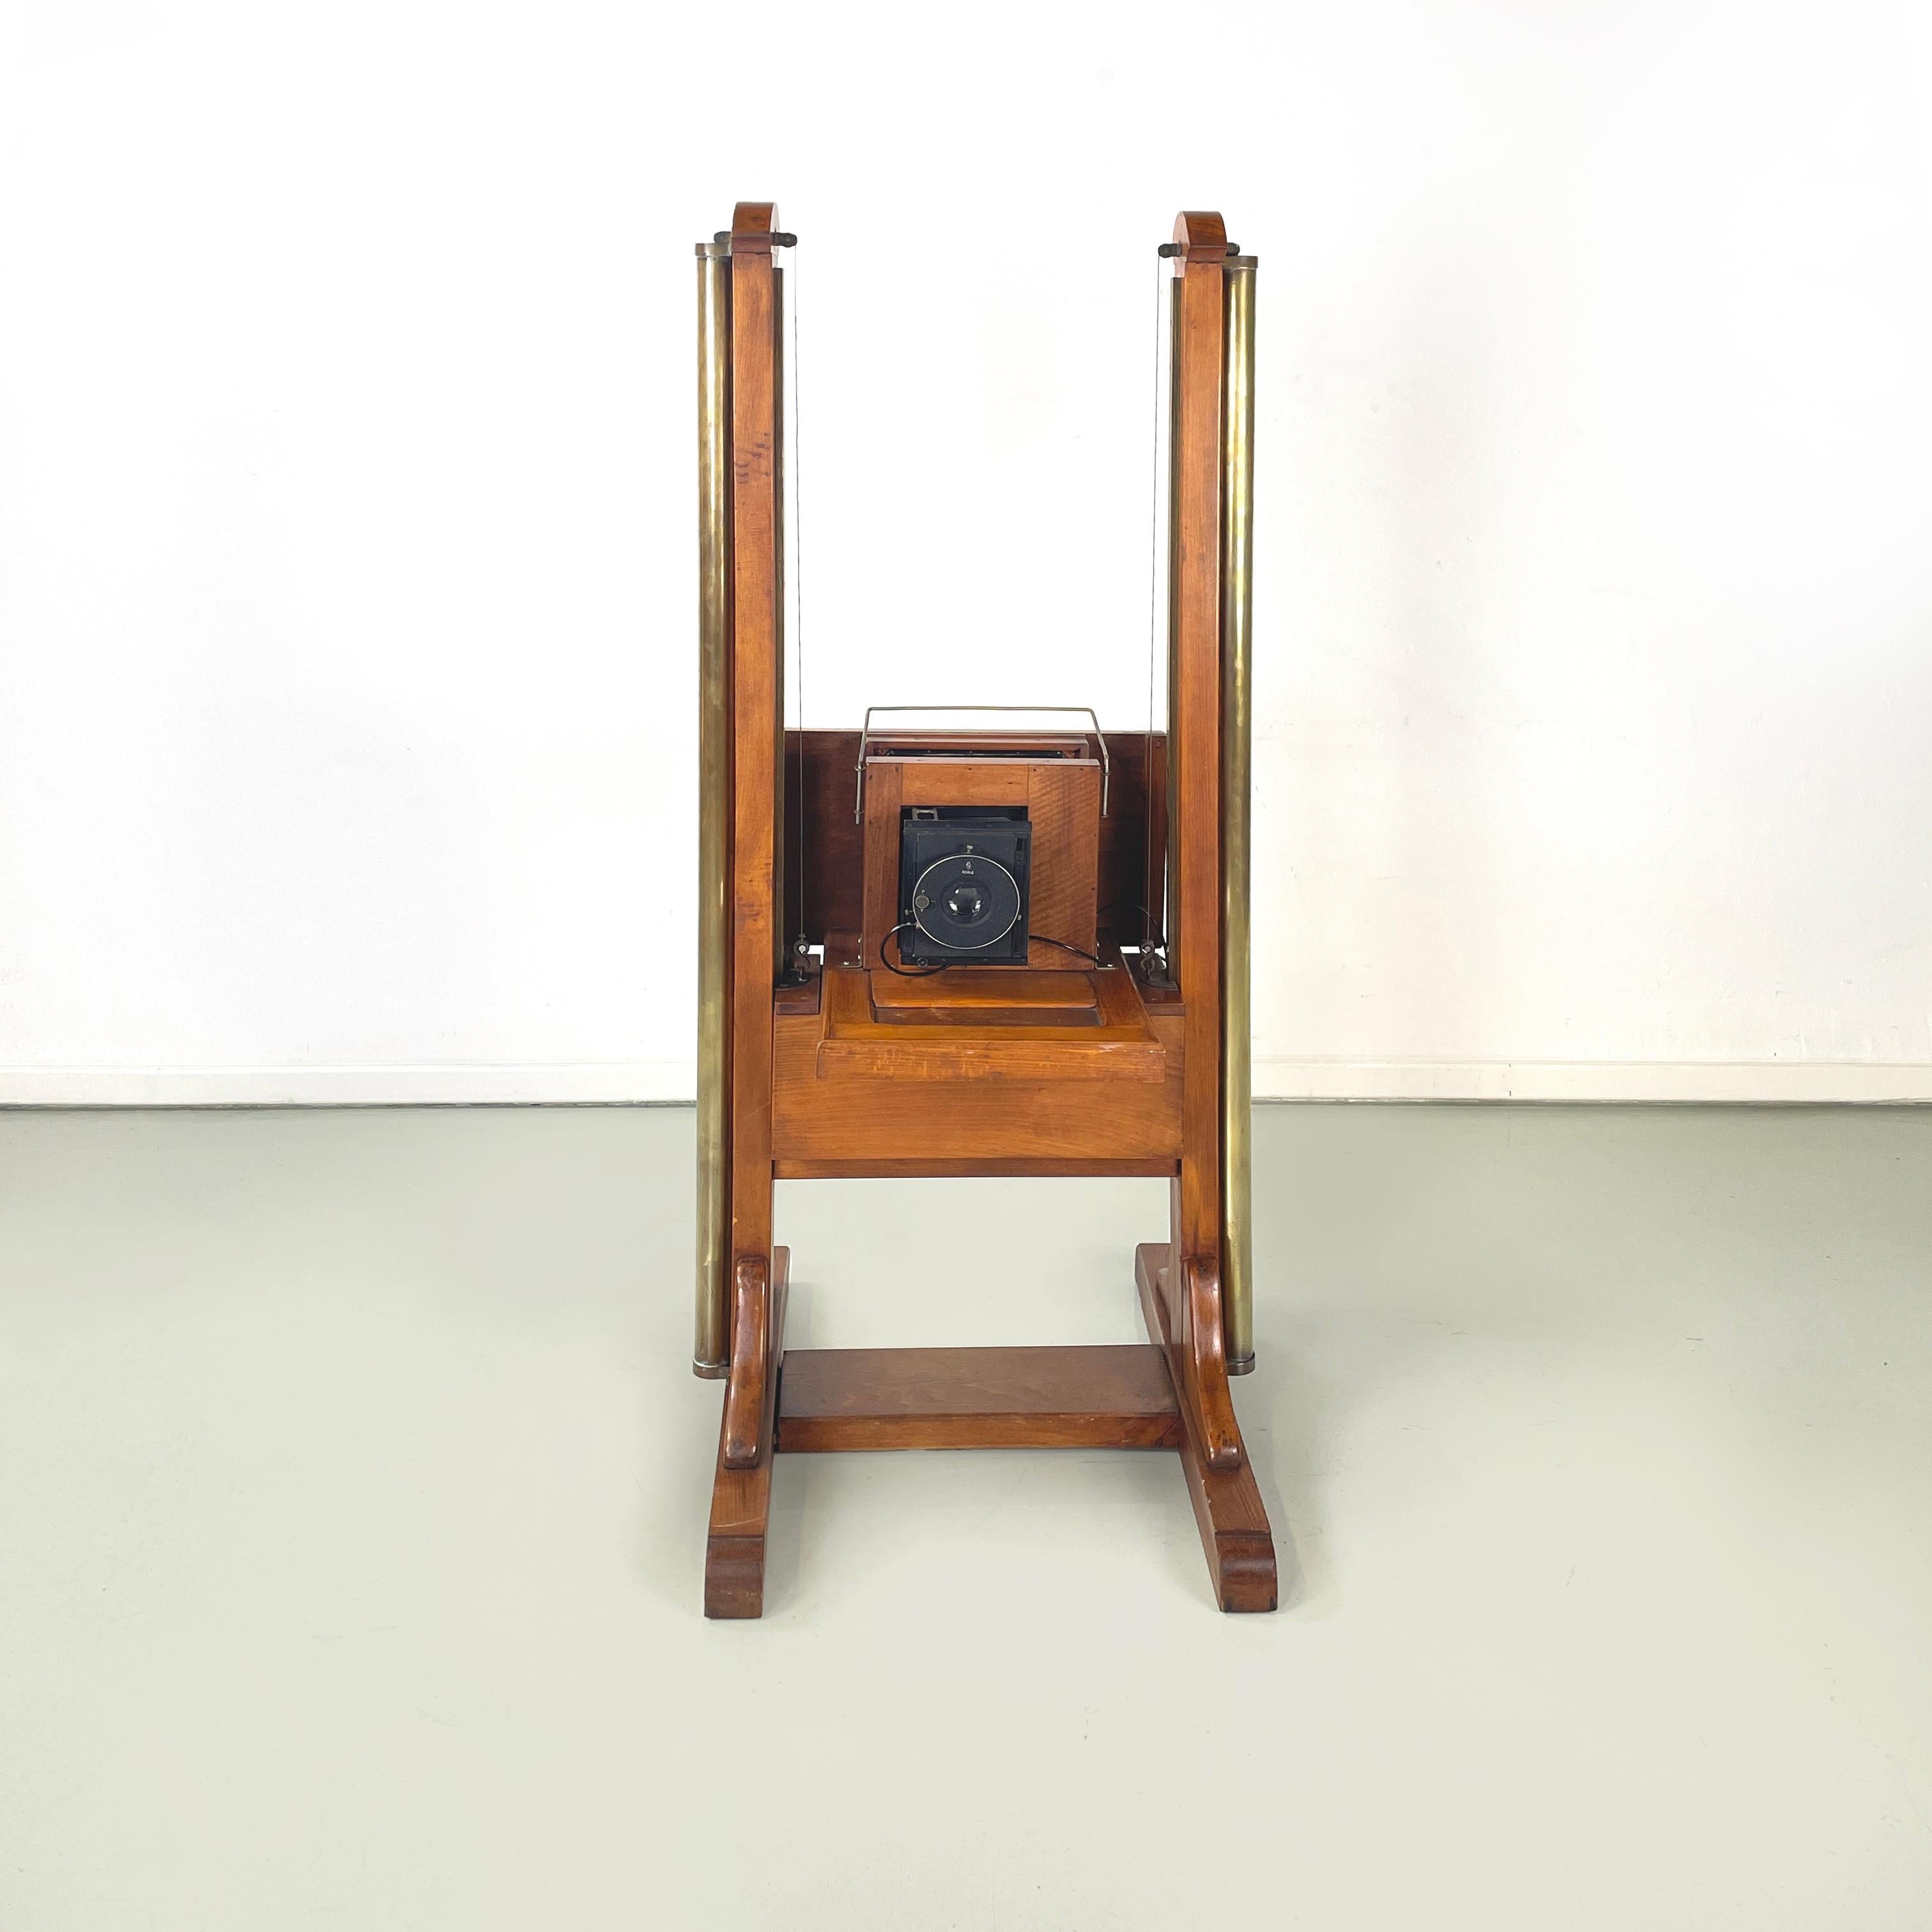 Italian antique vintage Analogue floor camera in wood and brass, 1900s
Analogue floor camera in wood and brass. The structure is composed of two solid wood uprights with brass cylinders, which allow the lens to raise and lower through thin cables.